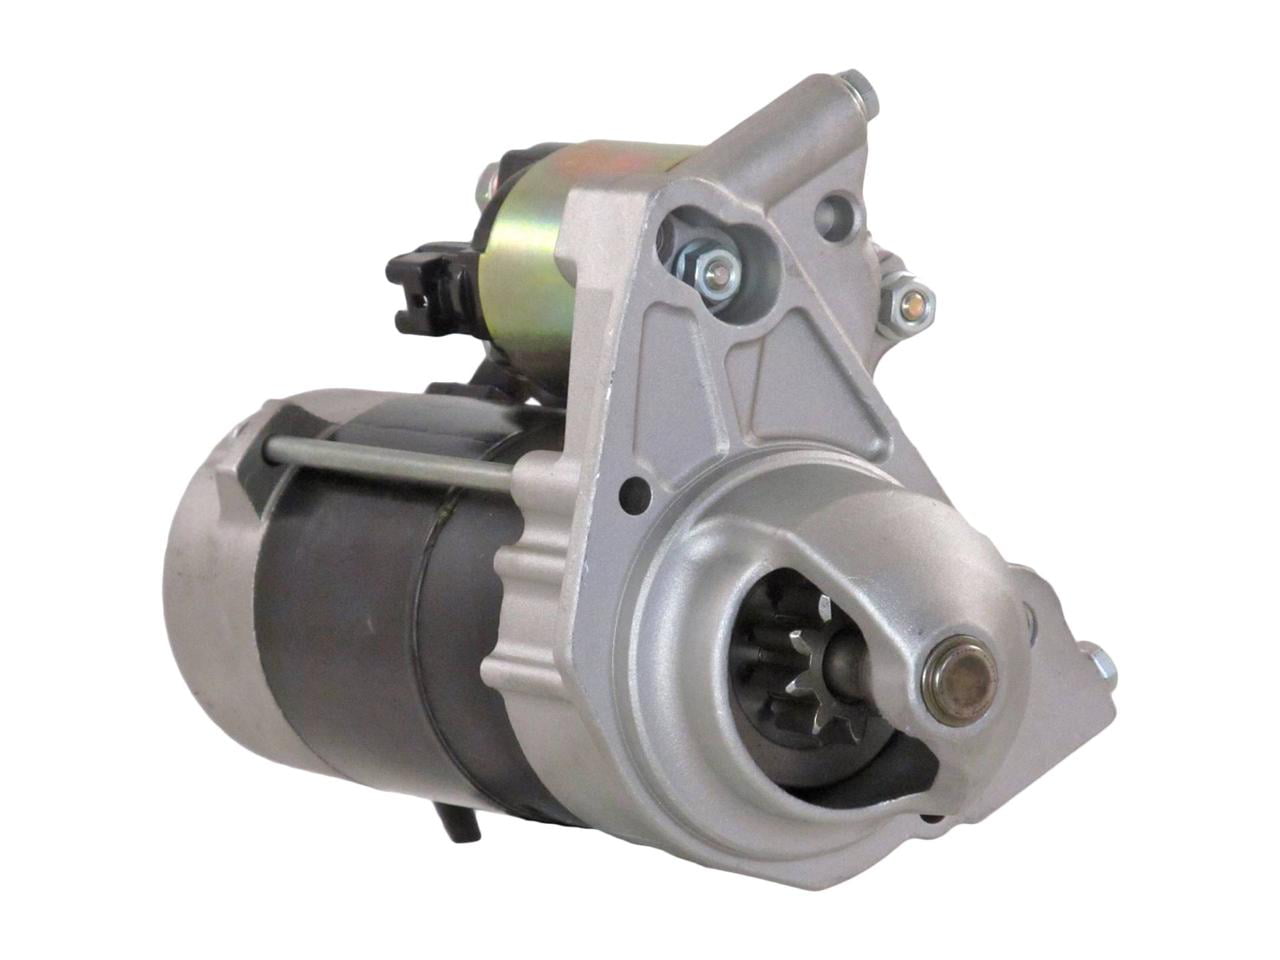 NEW STARTER MOTOR FITS TOYOTA 2008-2011 SEQUOIA 2007-2011 TUNDRA 8CYL 5